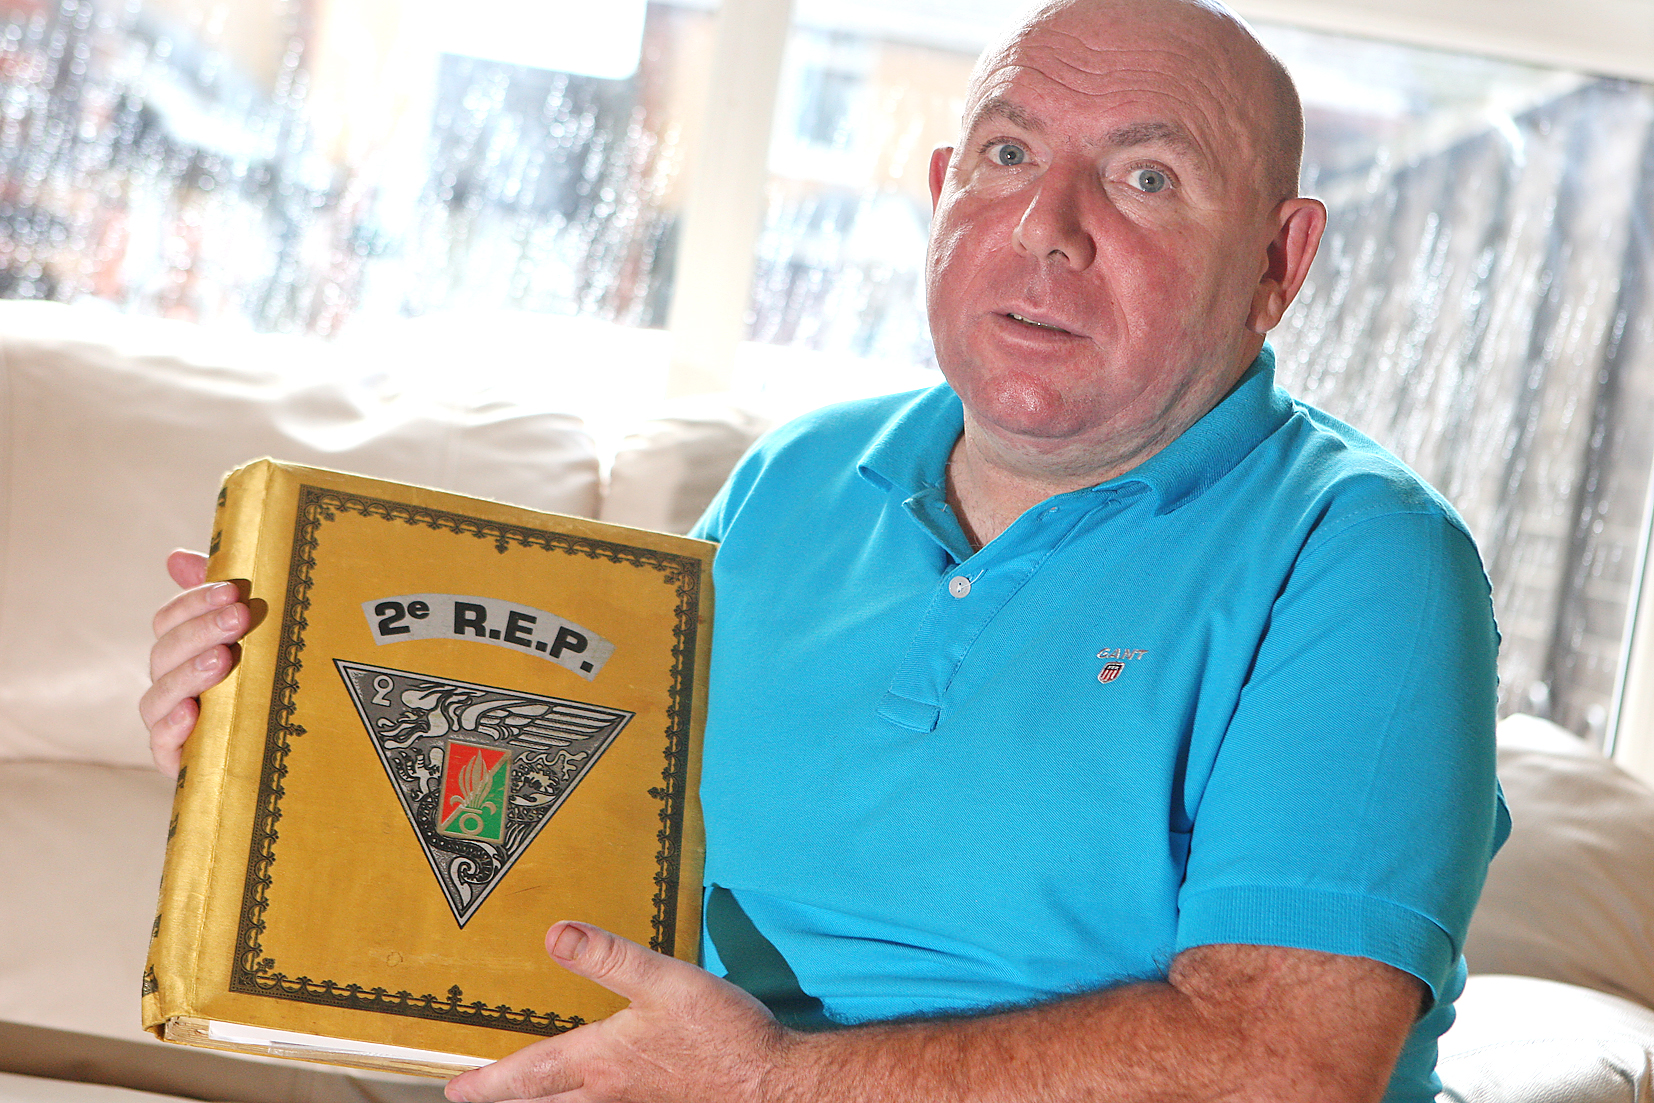 Seamus Sullivan wants to find out the truth about the killing of his brother Patrick and is offering a reward of £10,000. Seamus is holding memorabilia from Patrick’s time in the French Foreign Legion